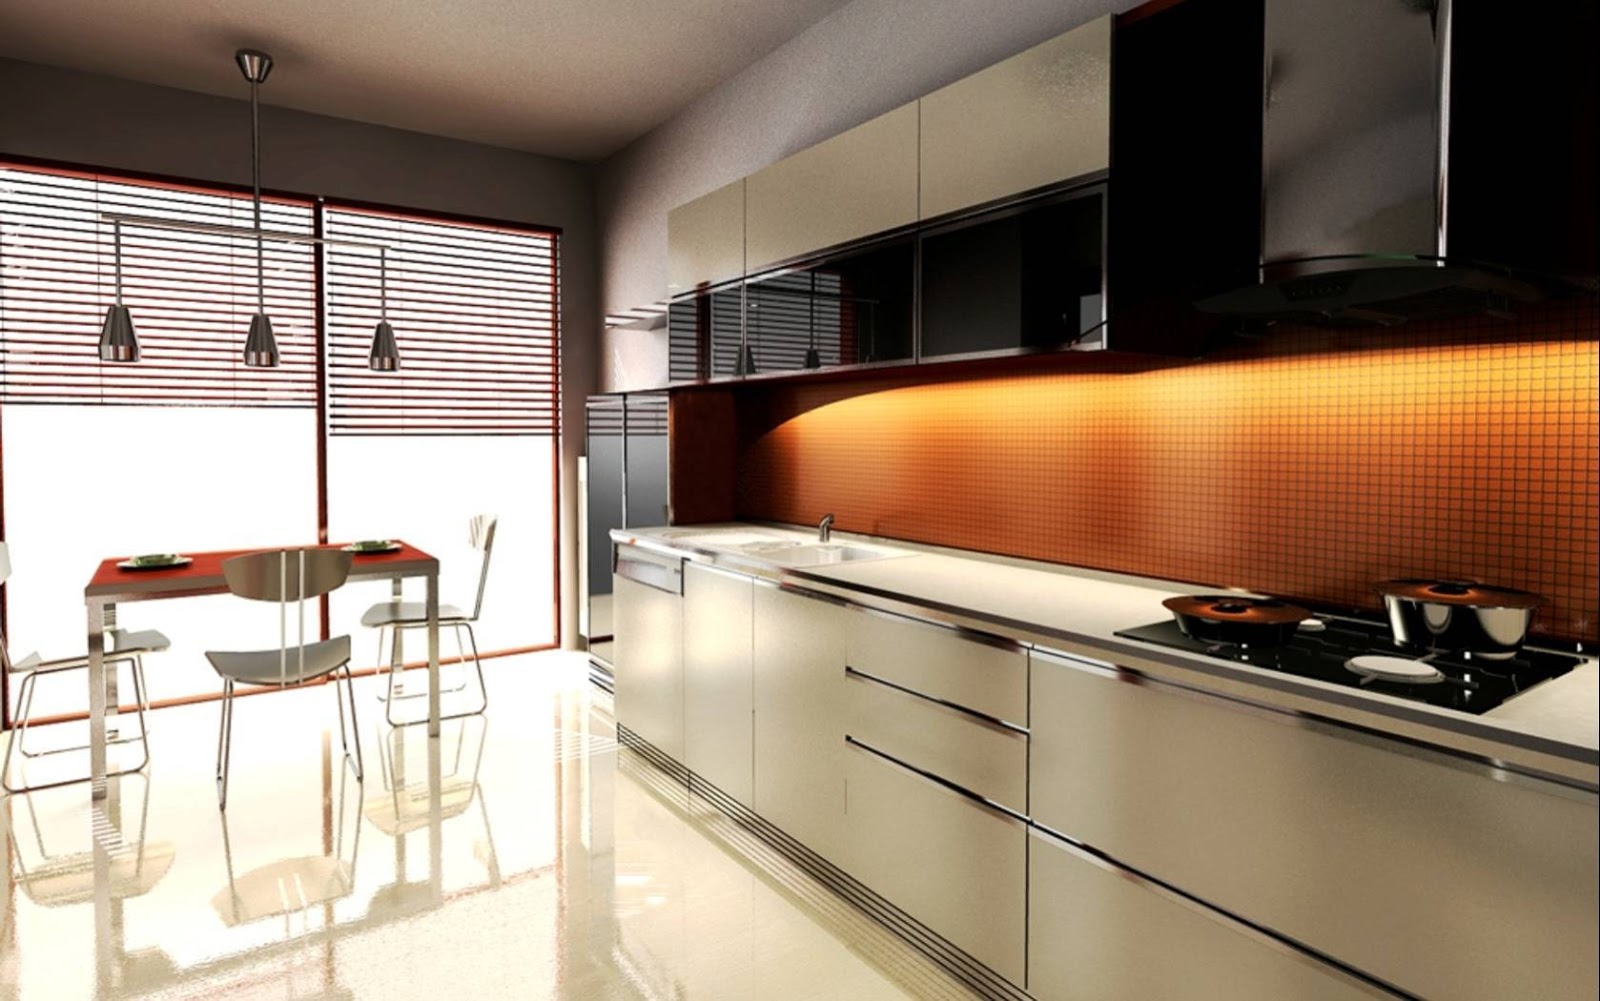 Carion Bilta: Add Some Elegance to Your Regular Kitchen Concepts